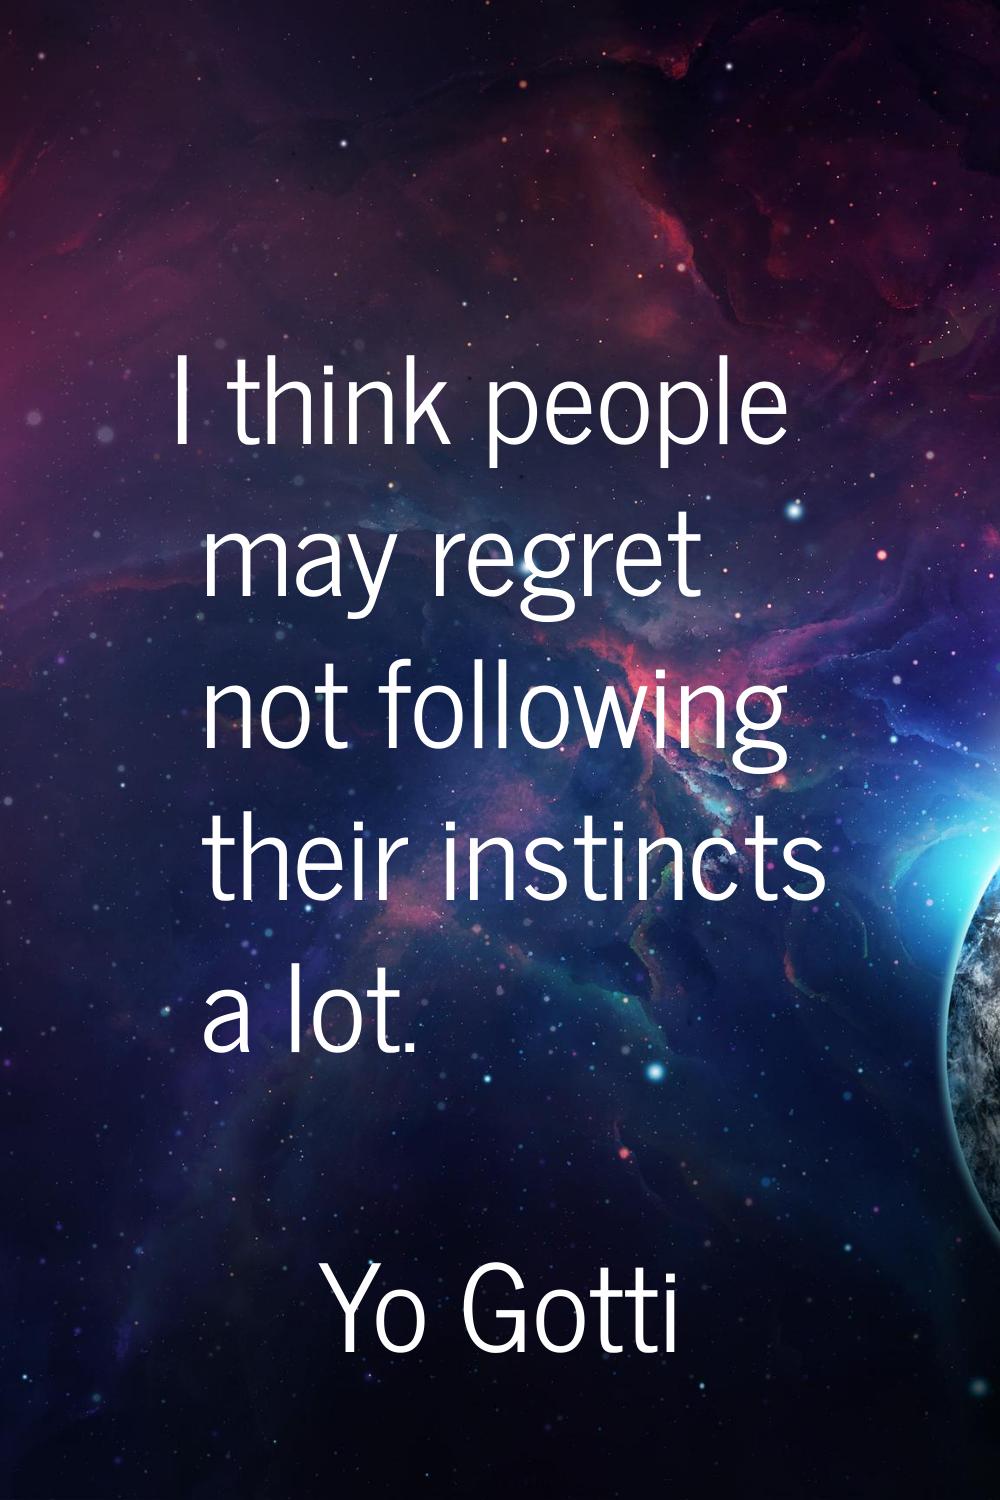 I think people may regret not following their instincts a lot.